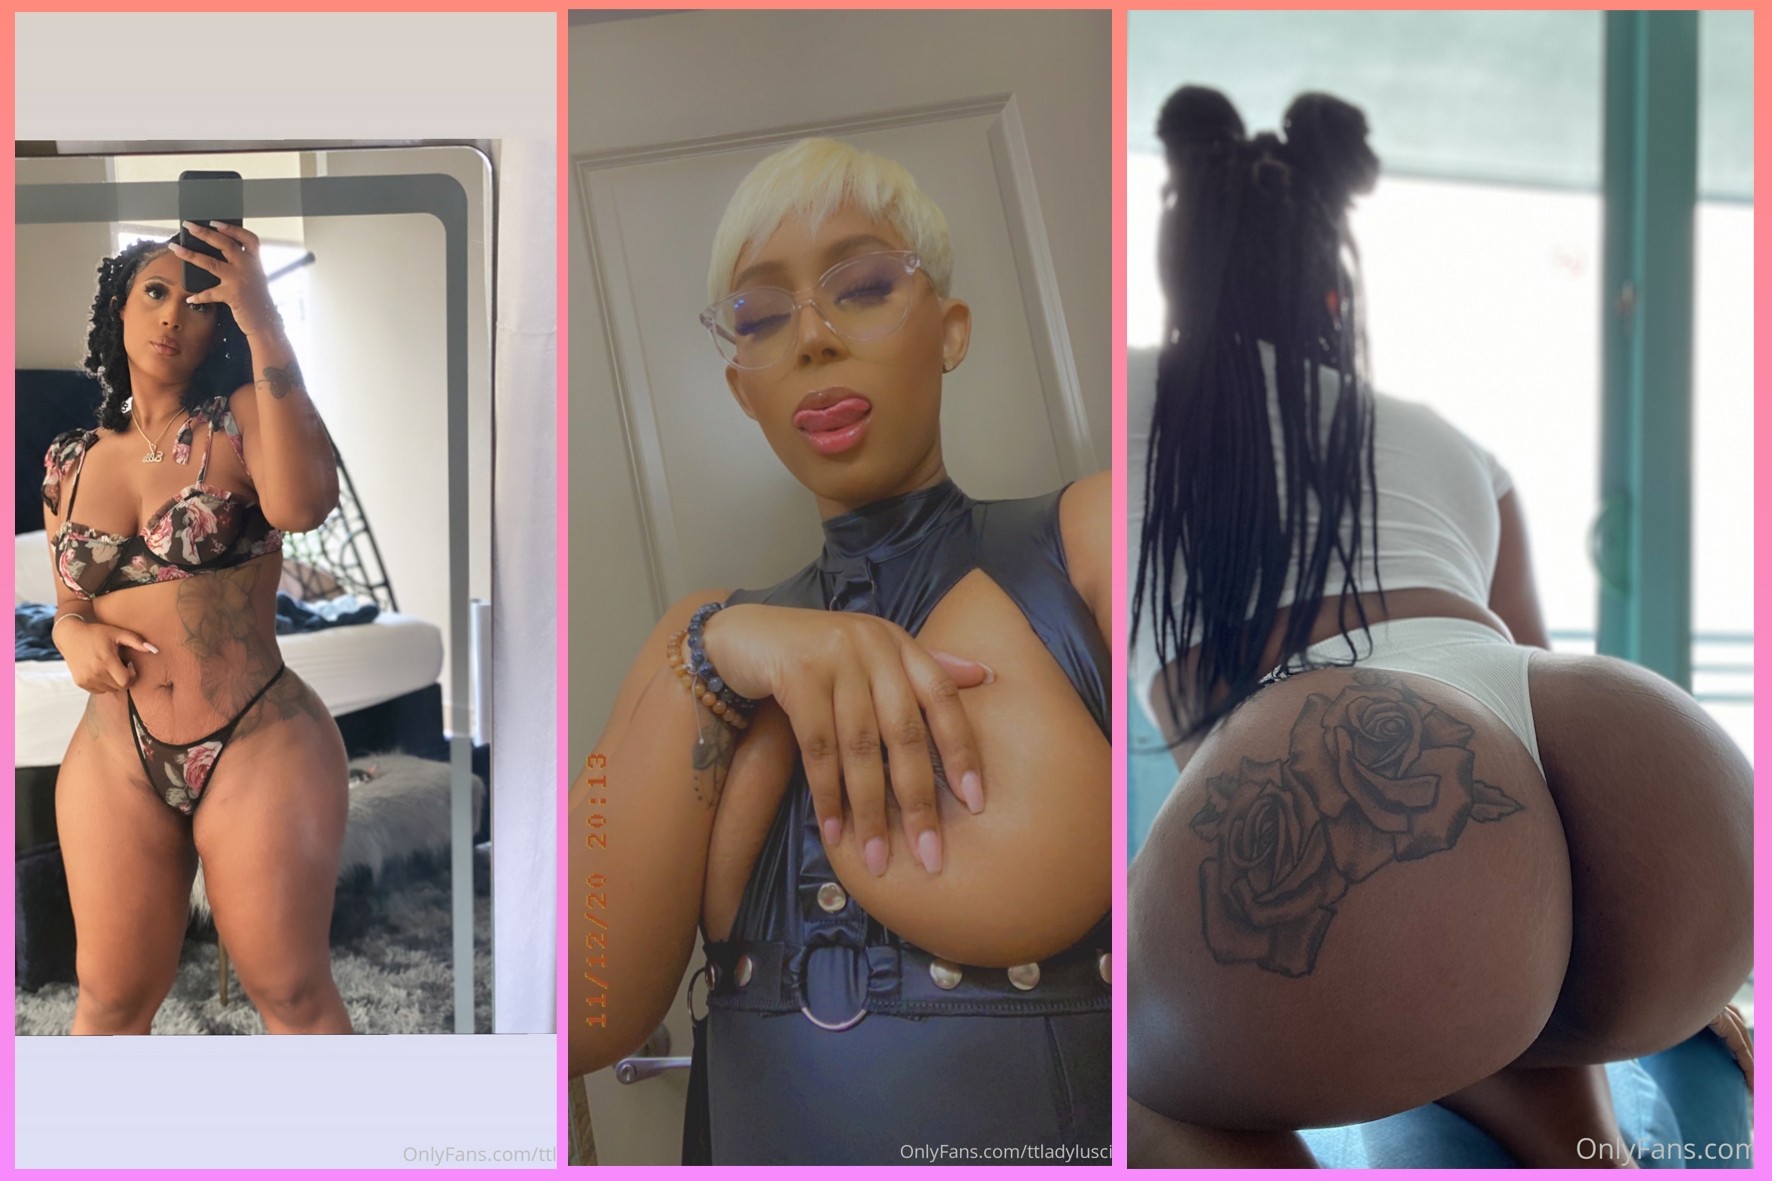 OnlyFans SiteRip 💖 Elle @ttladyluscious 💖 – 141 Videos and 21 Pics in Pack Leaks